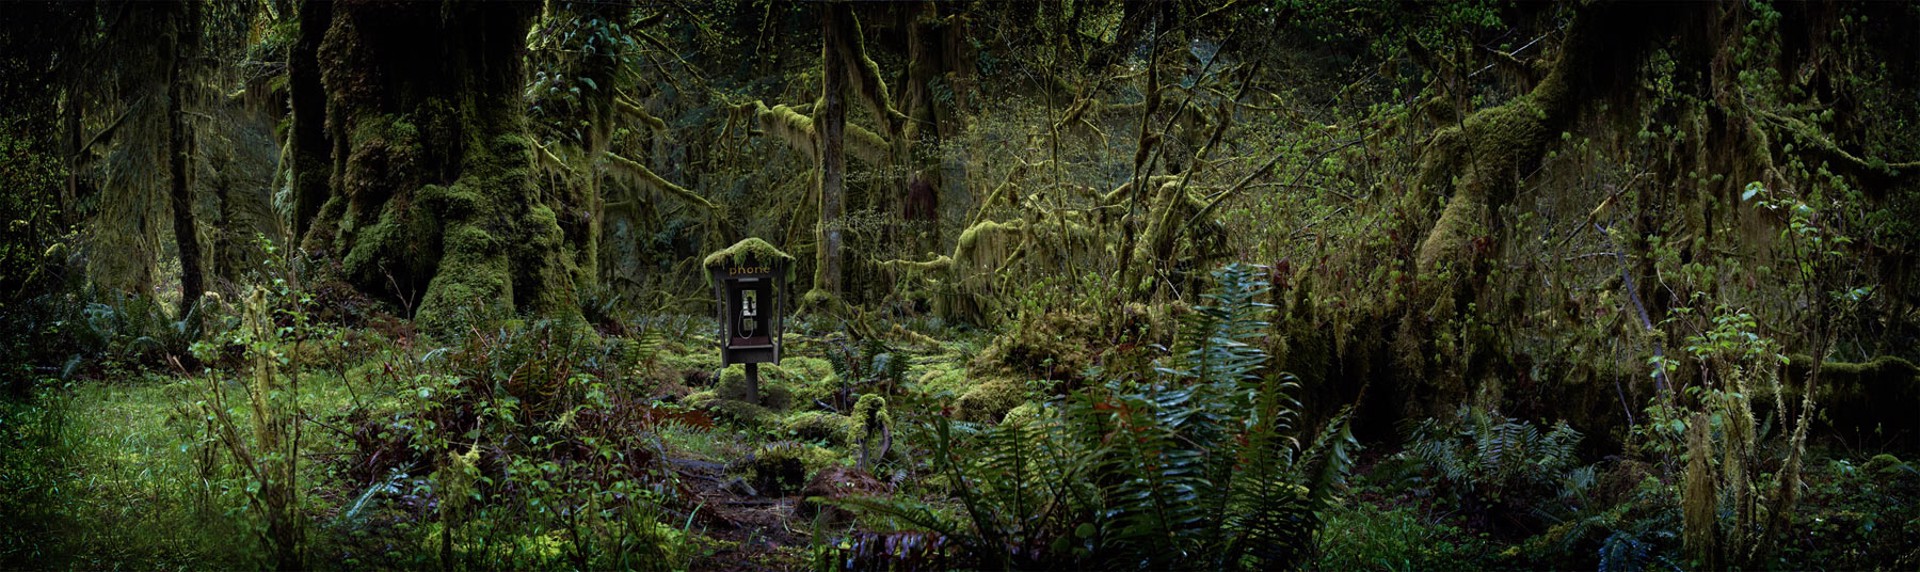 Phone Booth by Peter Andrew Lusztyk | Location